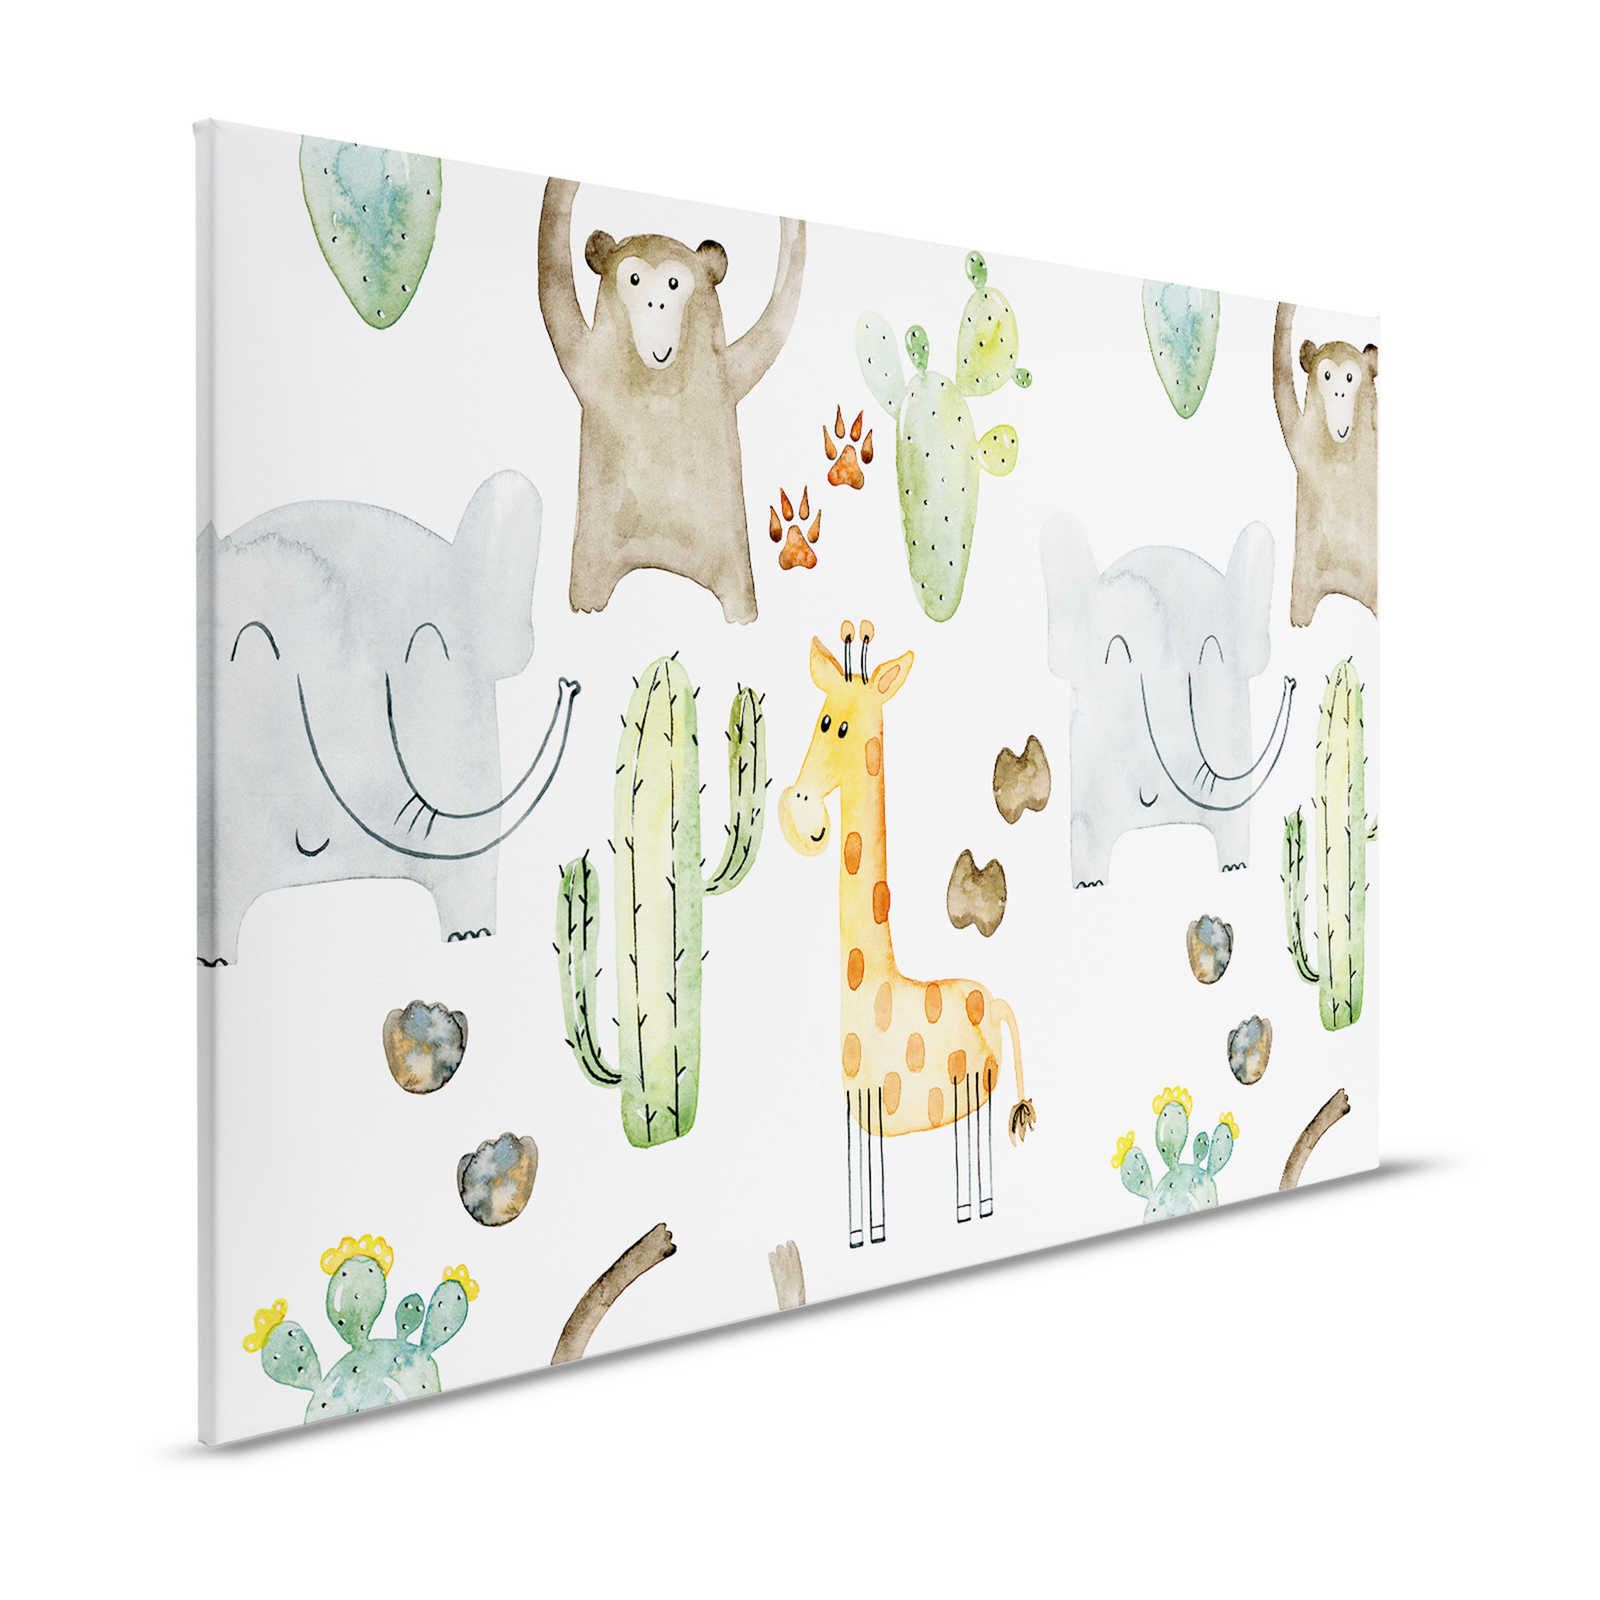 Canvas with animals and cacti - 120 cm x 80 cm
